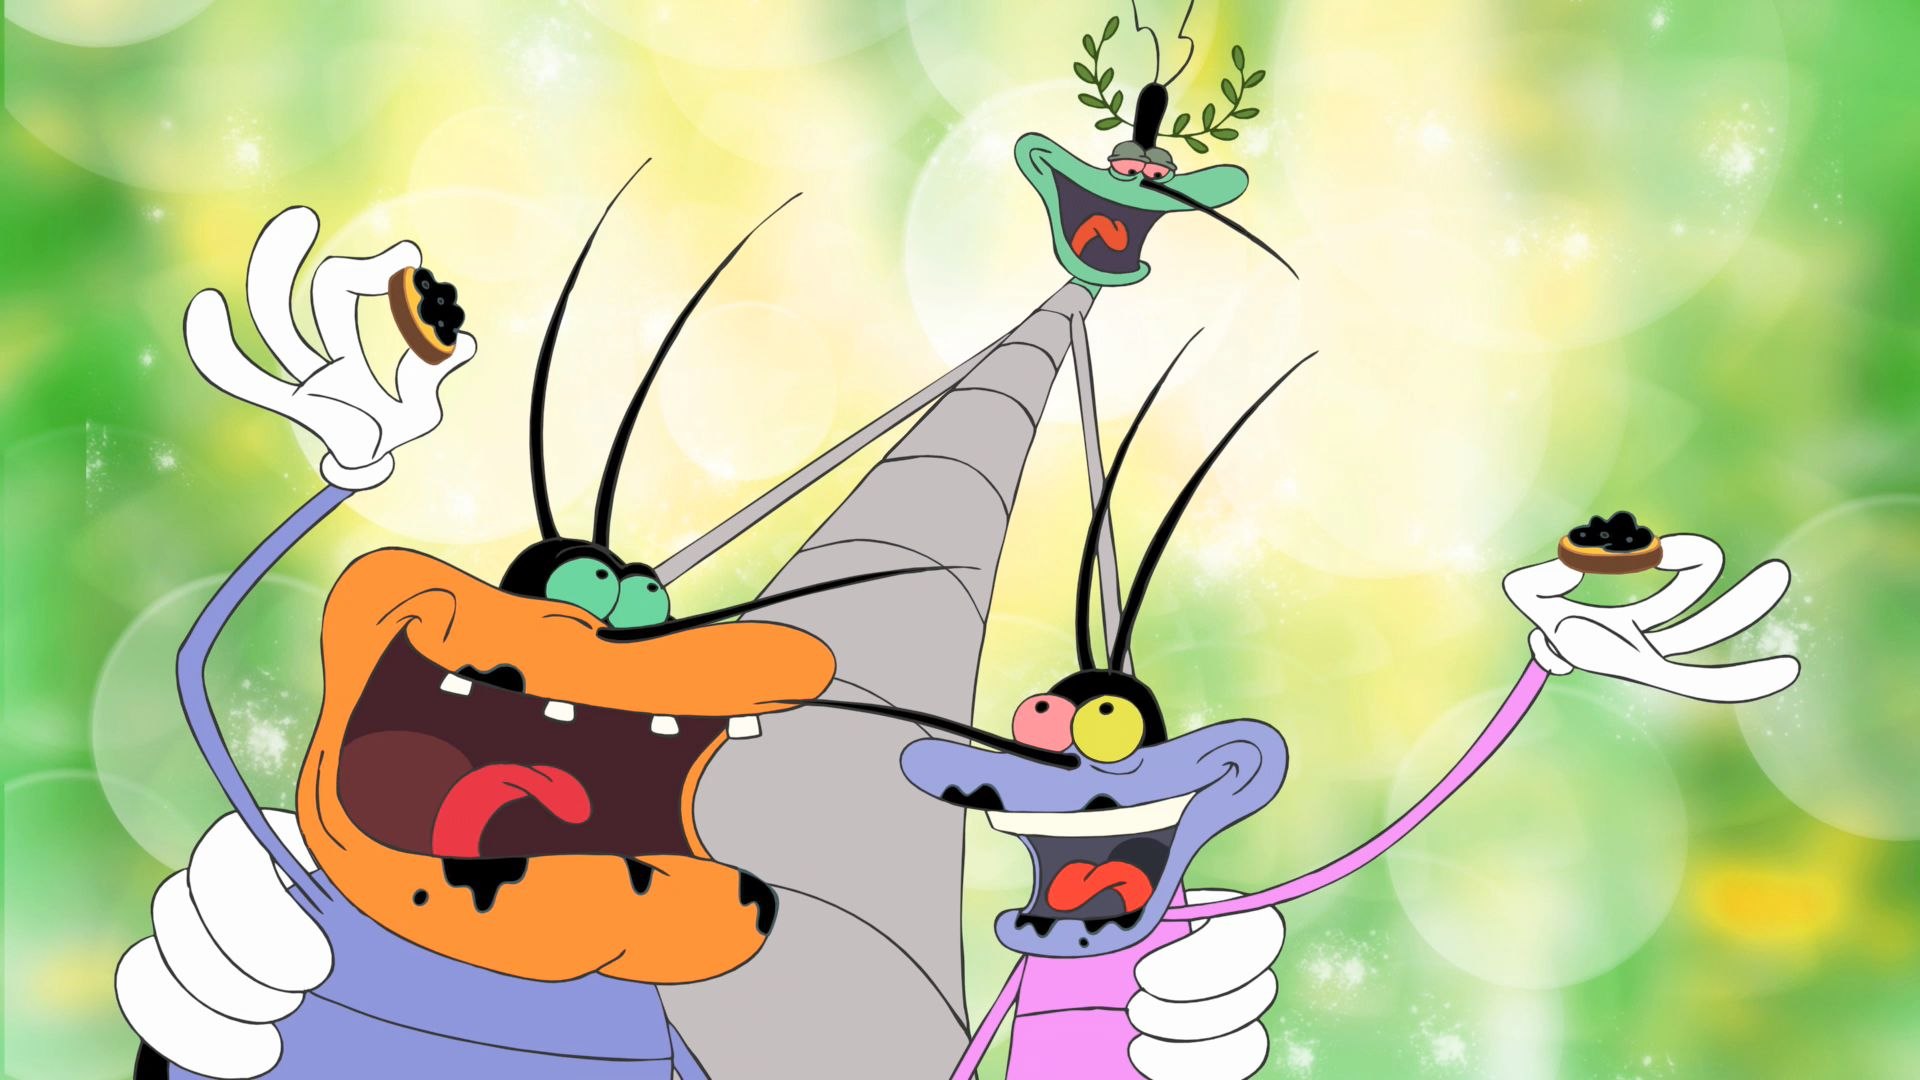 Oggy And The Cockroaches - Caviar Oggy And The Cockroaches , HD Wallpaper & Backgrounds